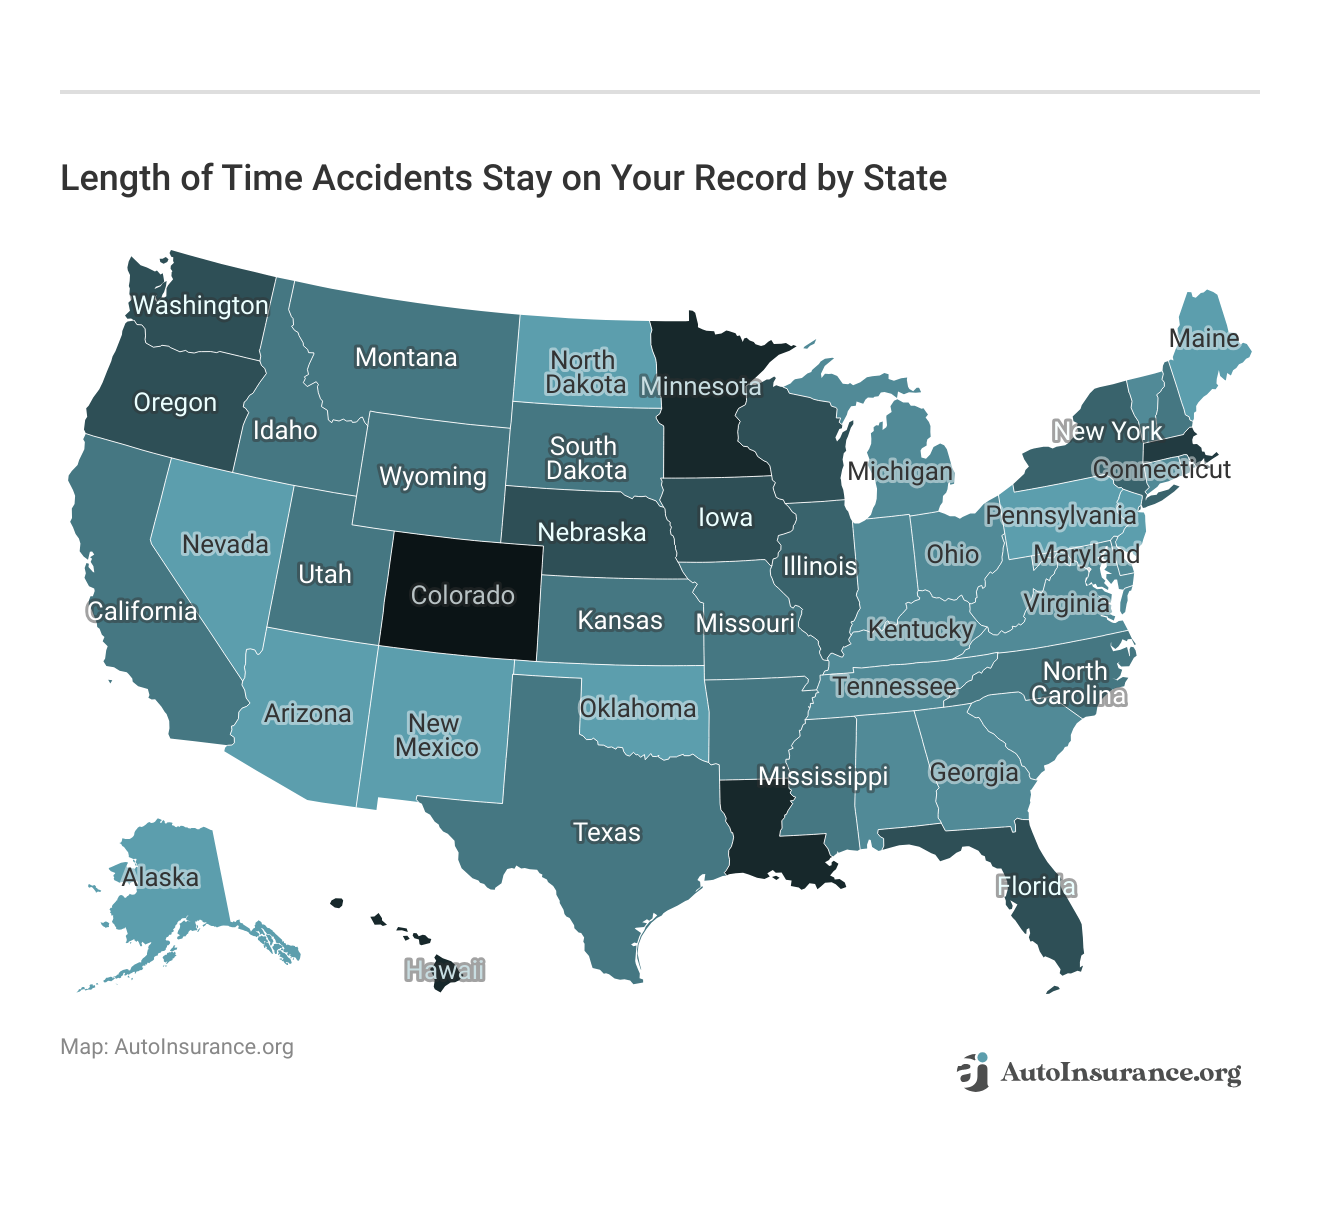 <h3>Length of Time Accidents Stay on Your Record by State</h3> 